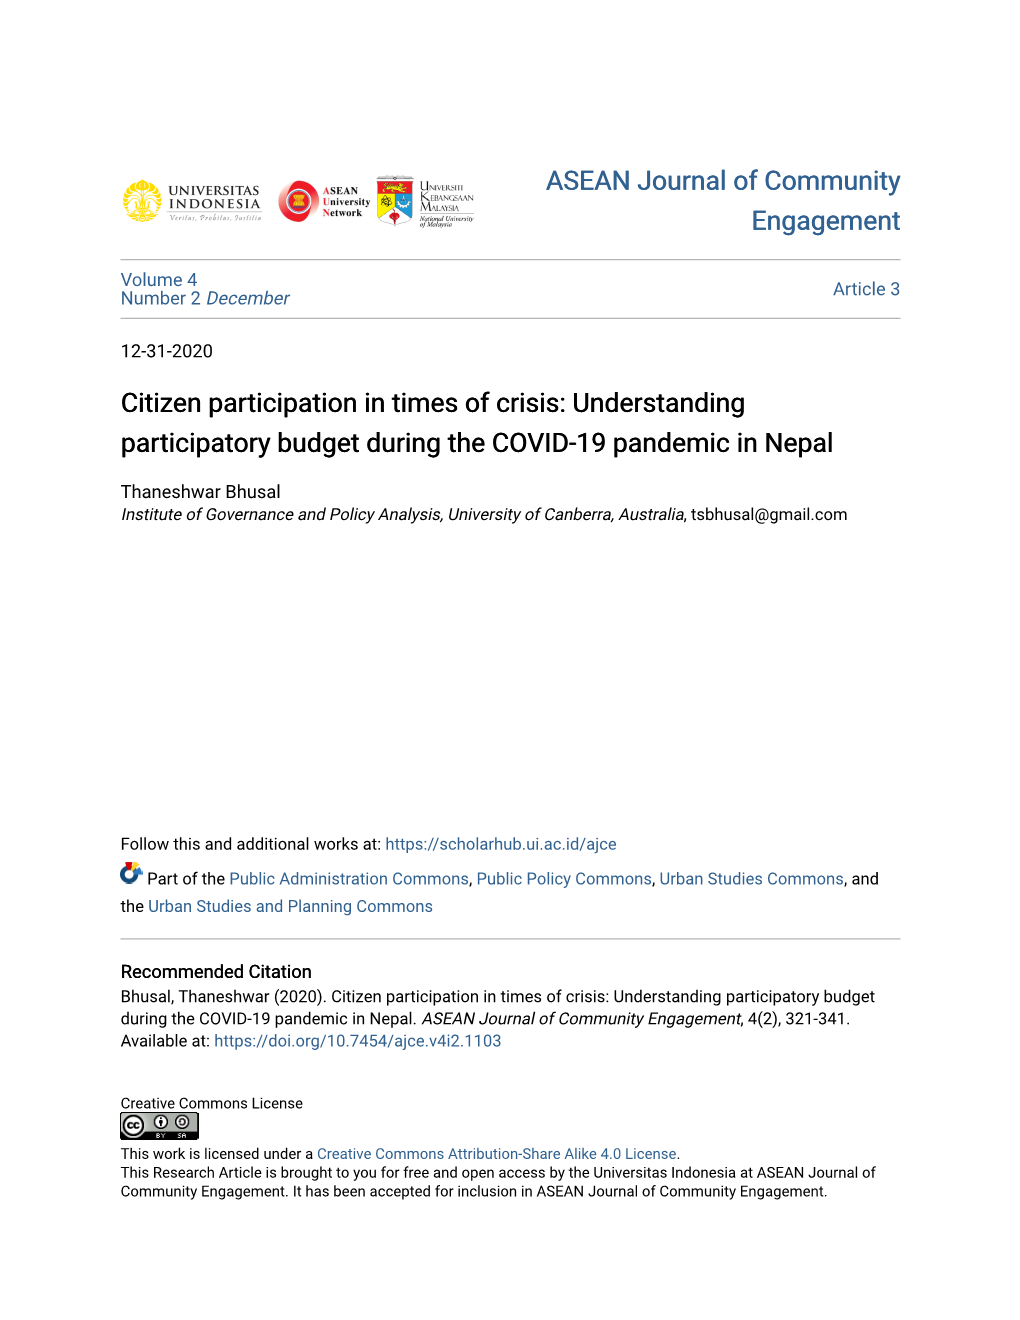 Citizen Participation in Times of Crisis: Understanding Participatory Budget During the COVID-19 Pandemic in Nepal